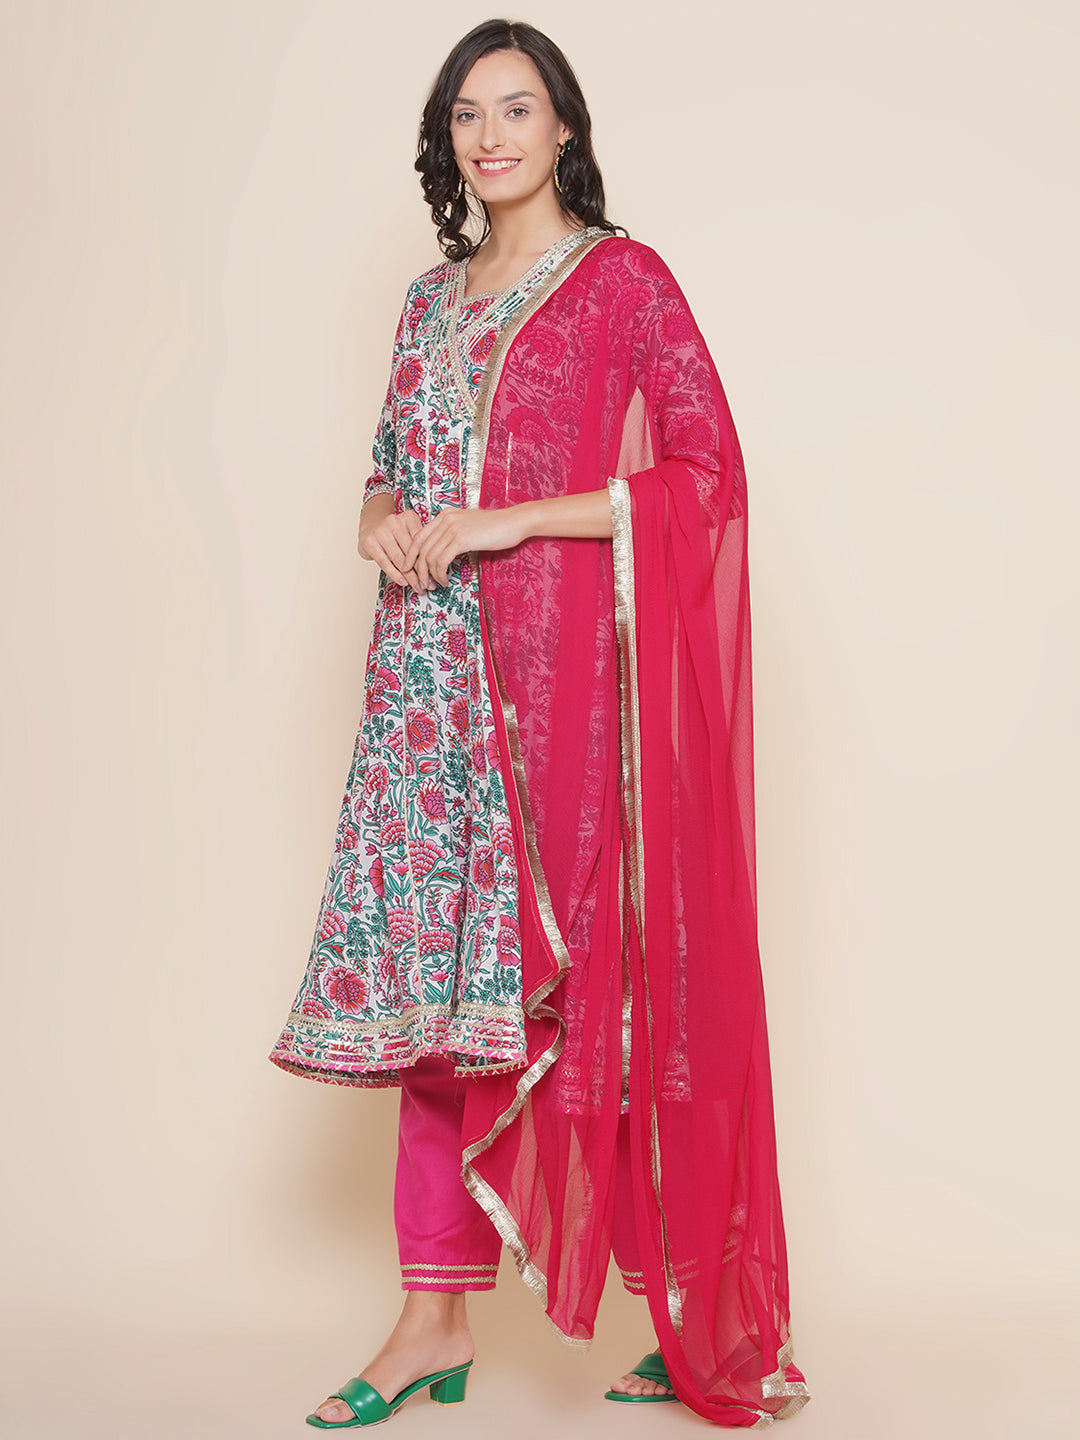 White Pink Multi Floral Printed Pannel Flared Gotta Details Kurta & Pink Palazzos With Dupatta